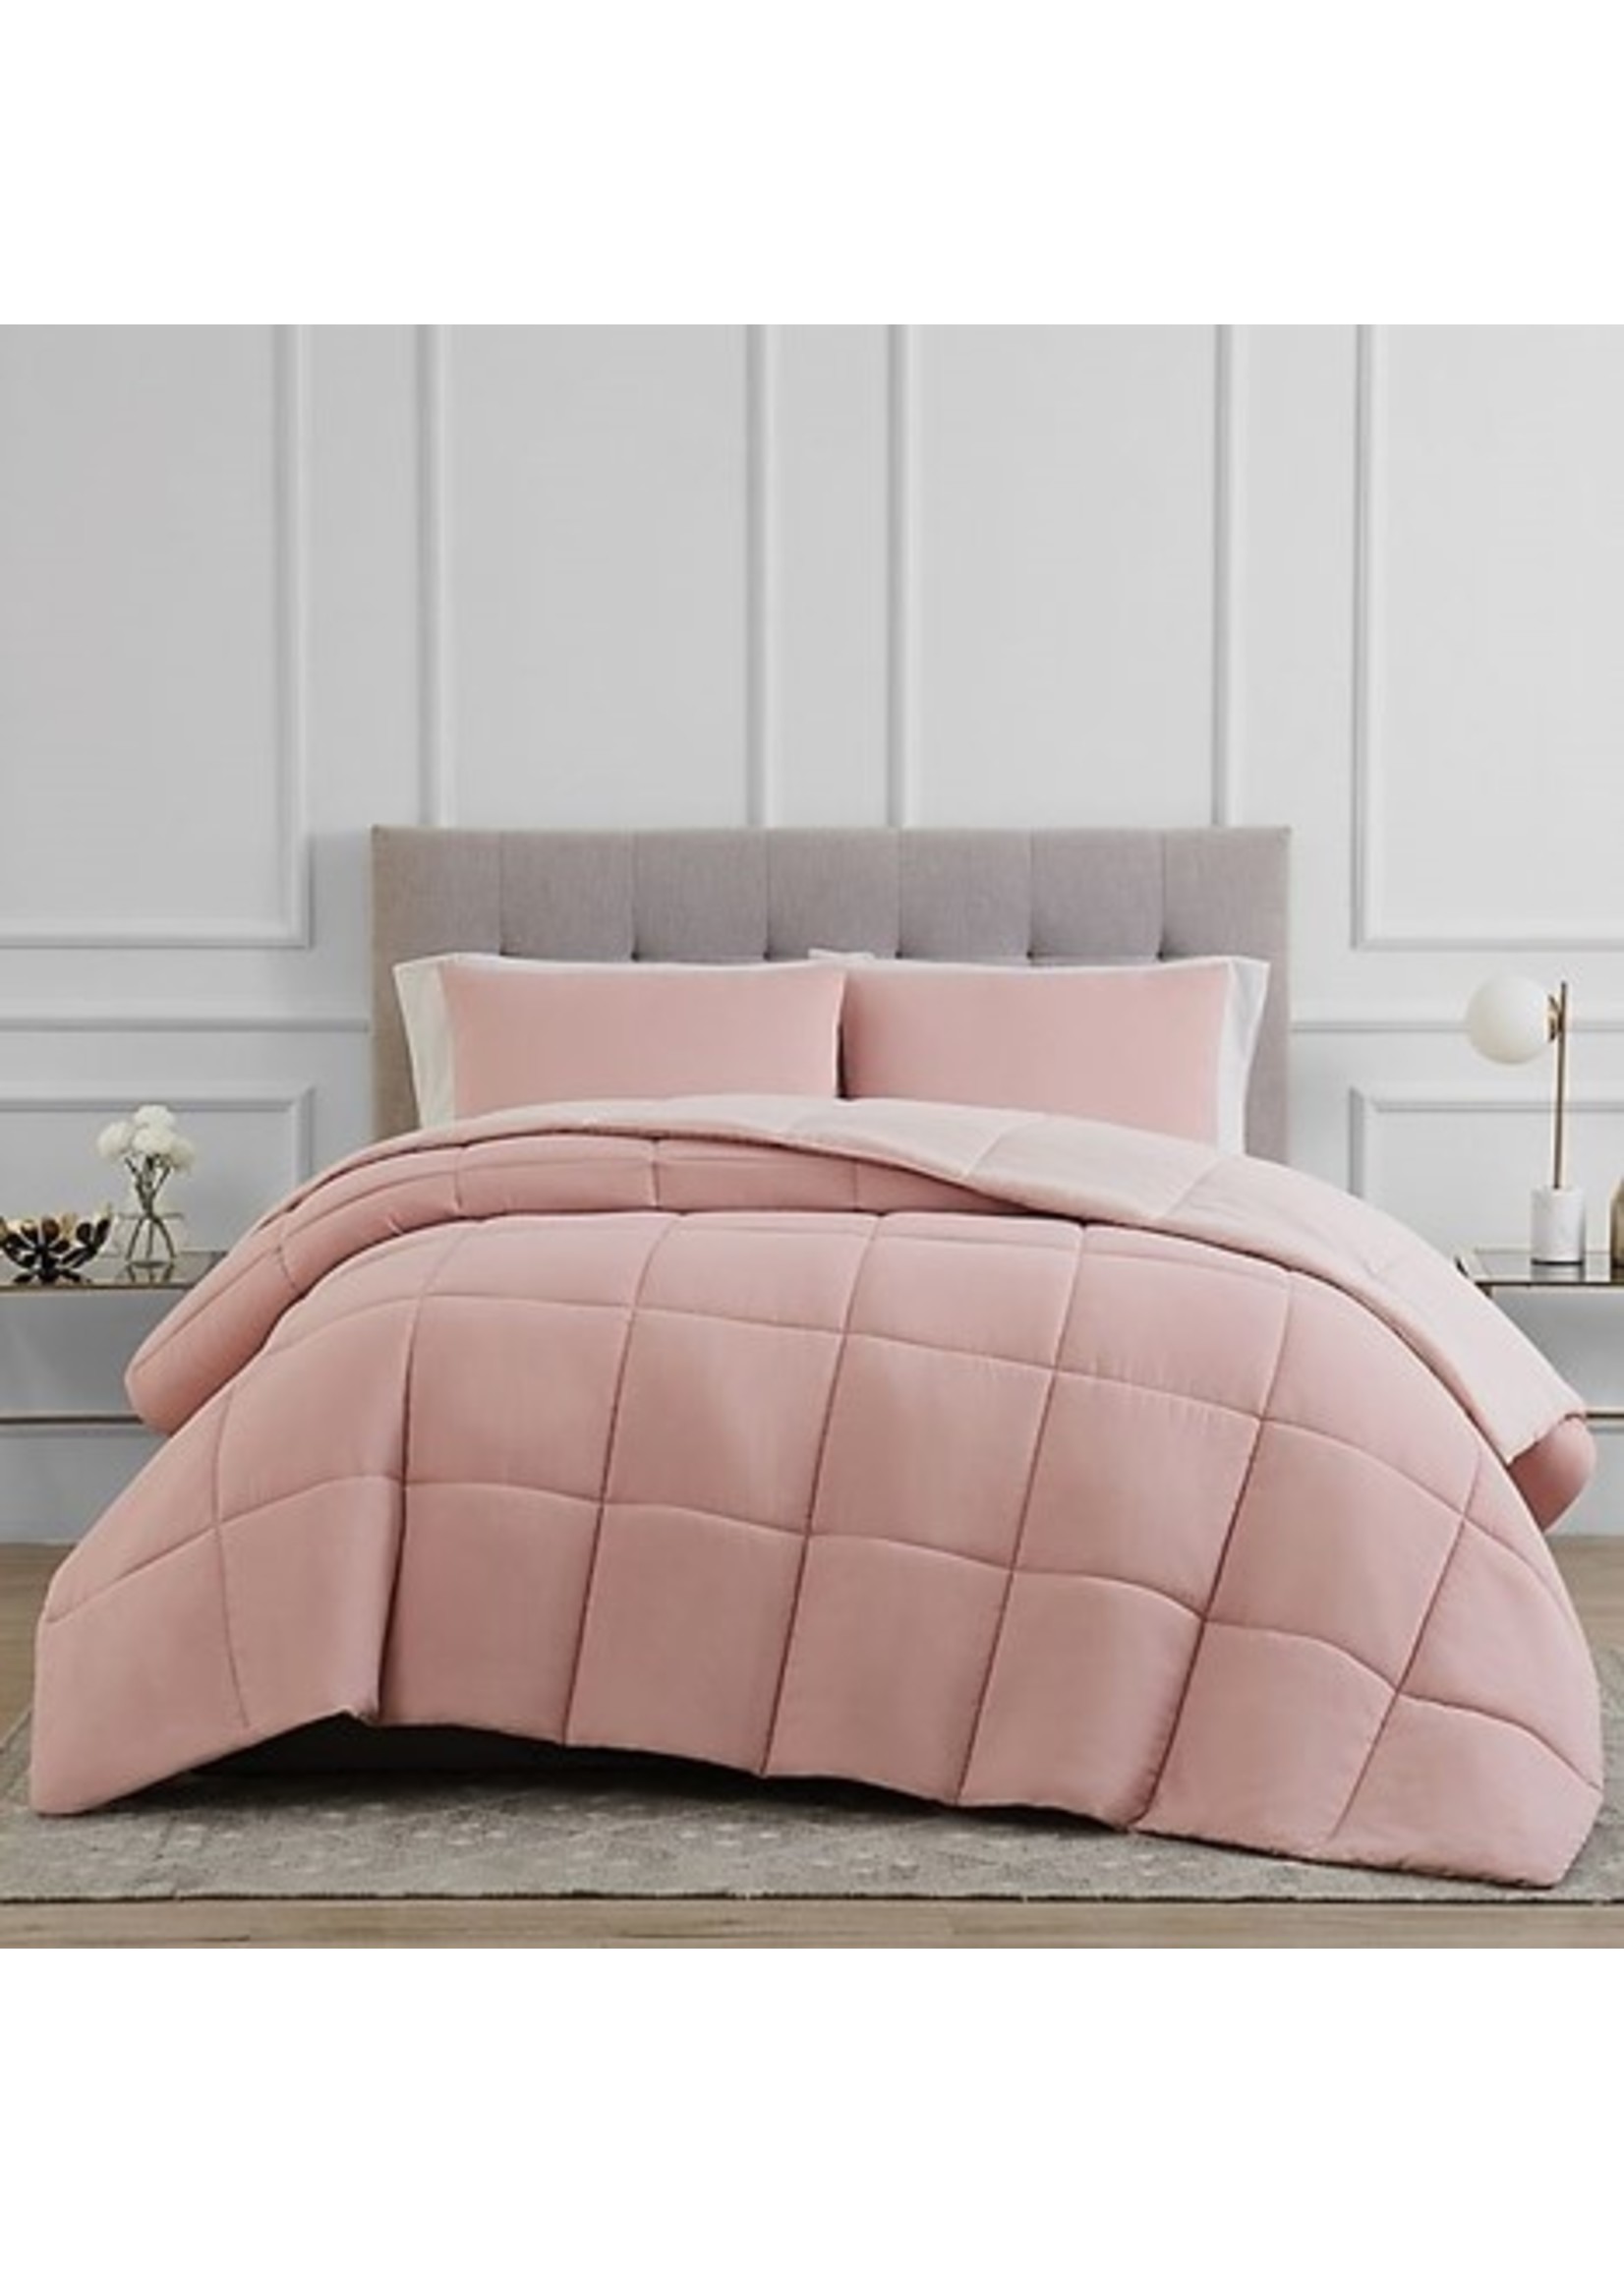 Simply Essentials Bedding Kit in "Blush"